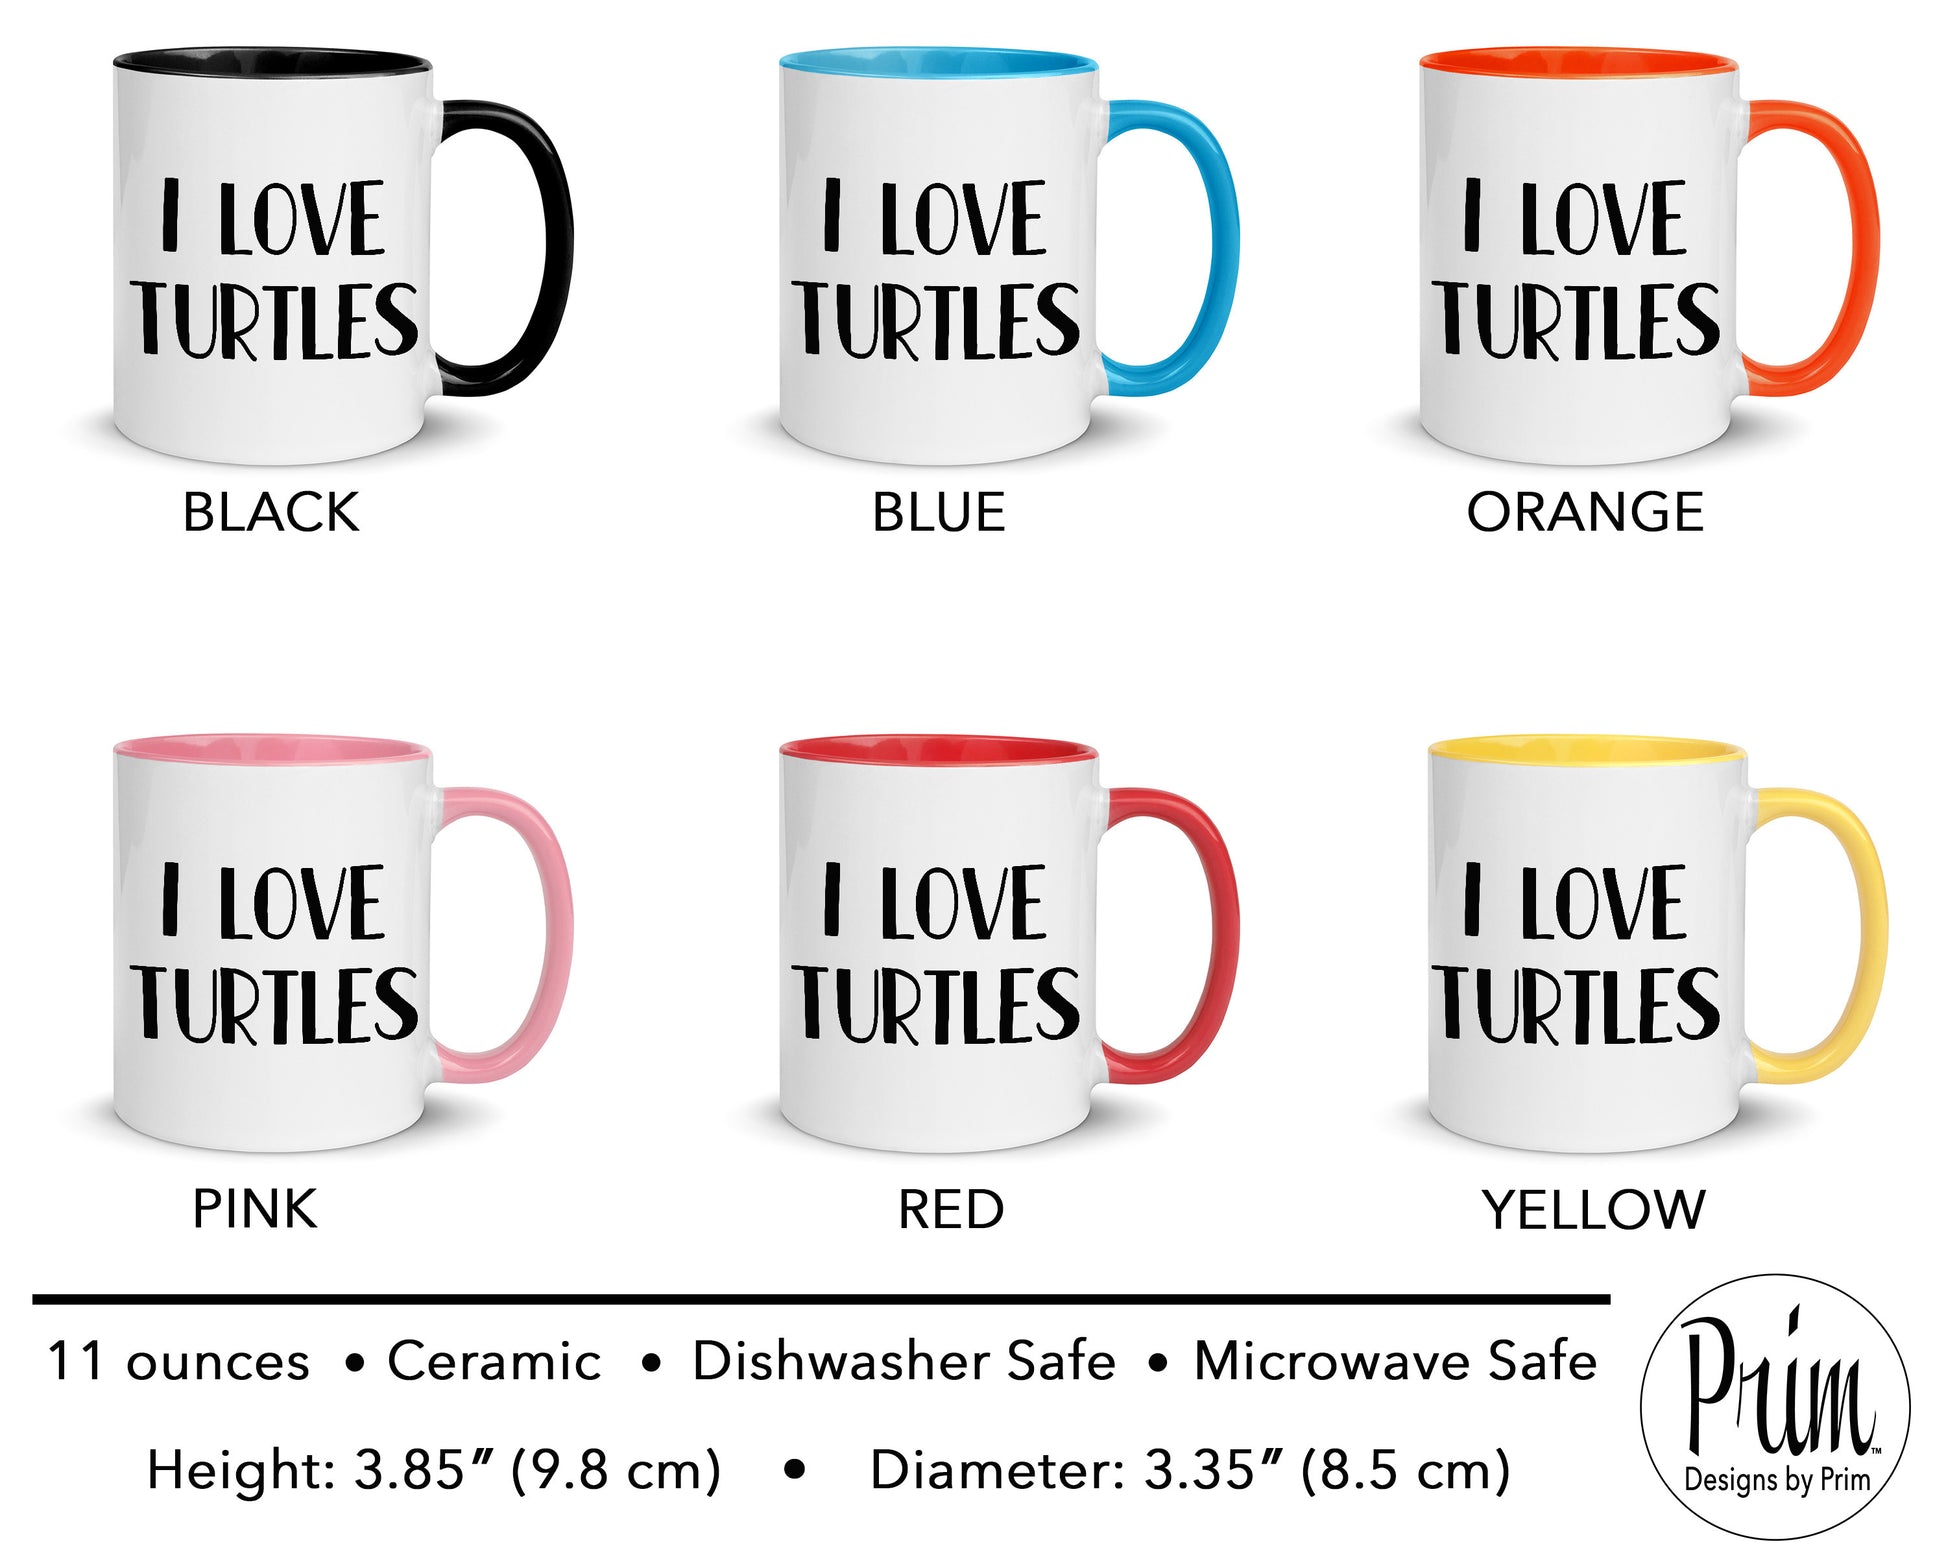 Designs by Prim I Love Turtles 11 Ounce Mug | Kim Richards Funny RHOBH Quote| Tortoise Lover Coffee Tea Cup | Real Housewives of Beverly Hills Fan Gifts